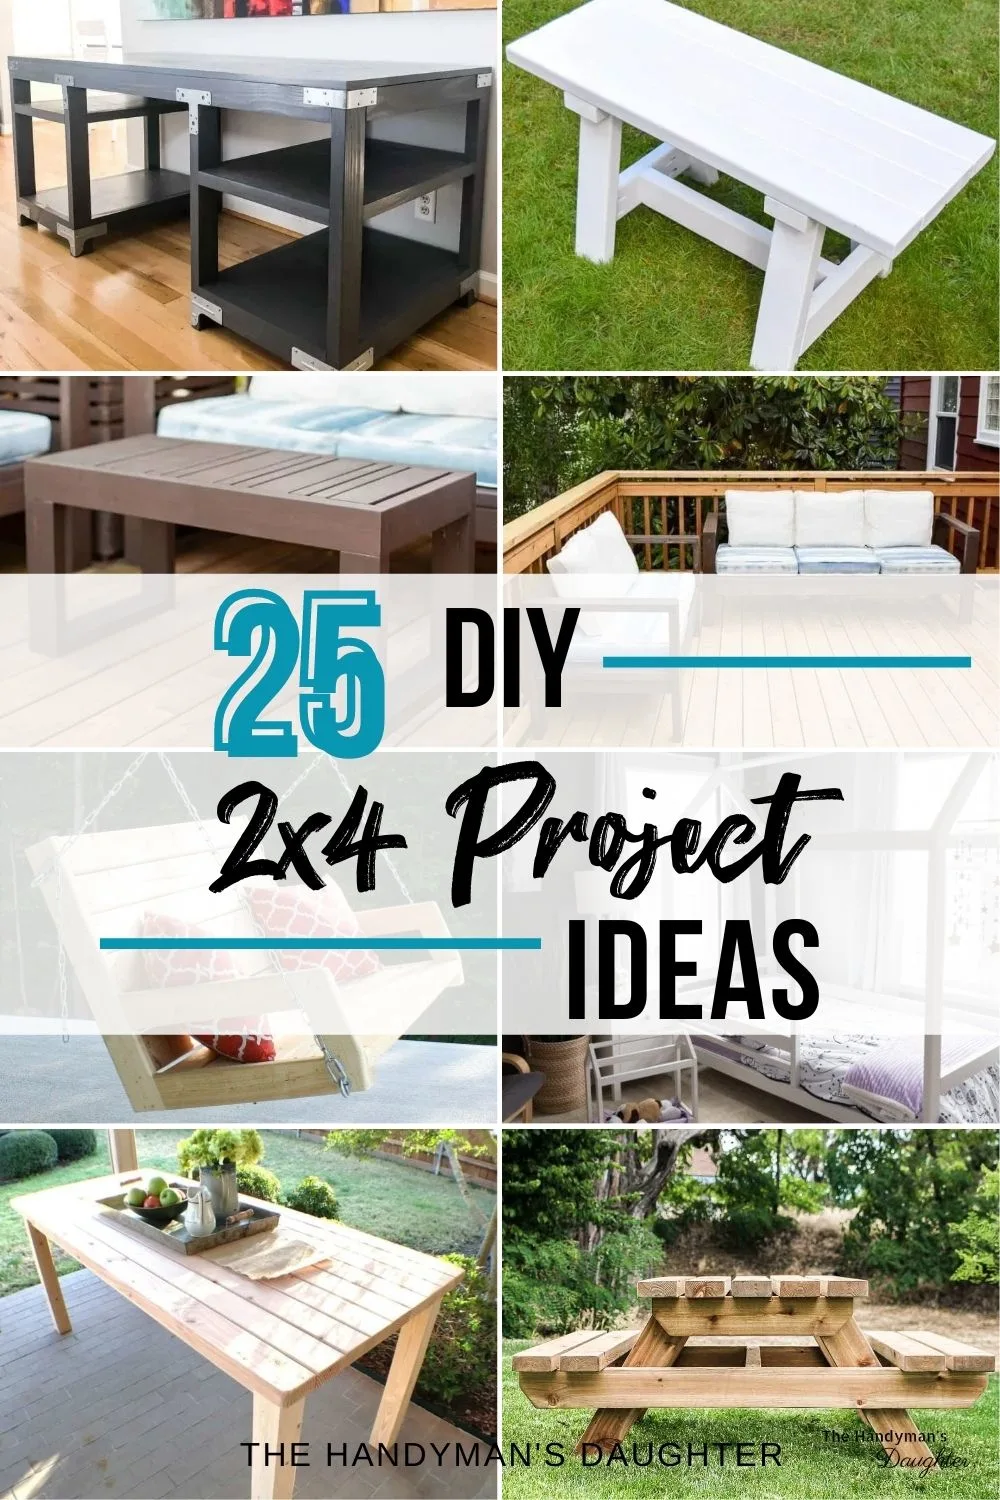 30 Simple And Amazing 2x4 Wood Projects - Anika's DIY Life